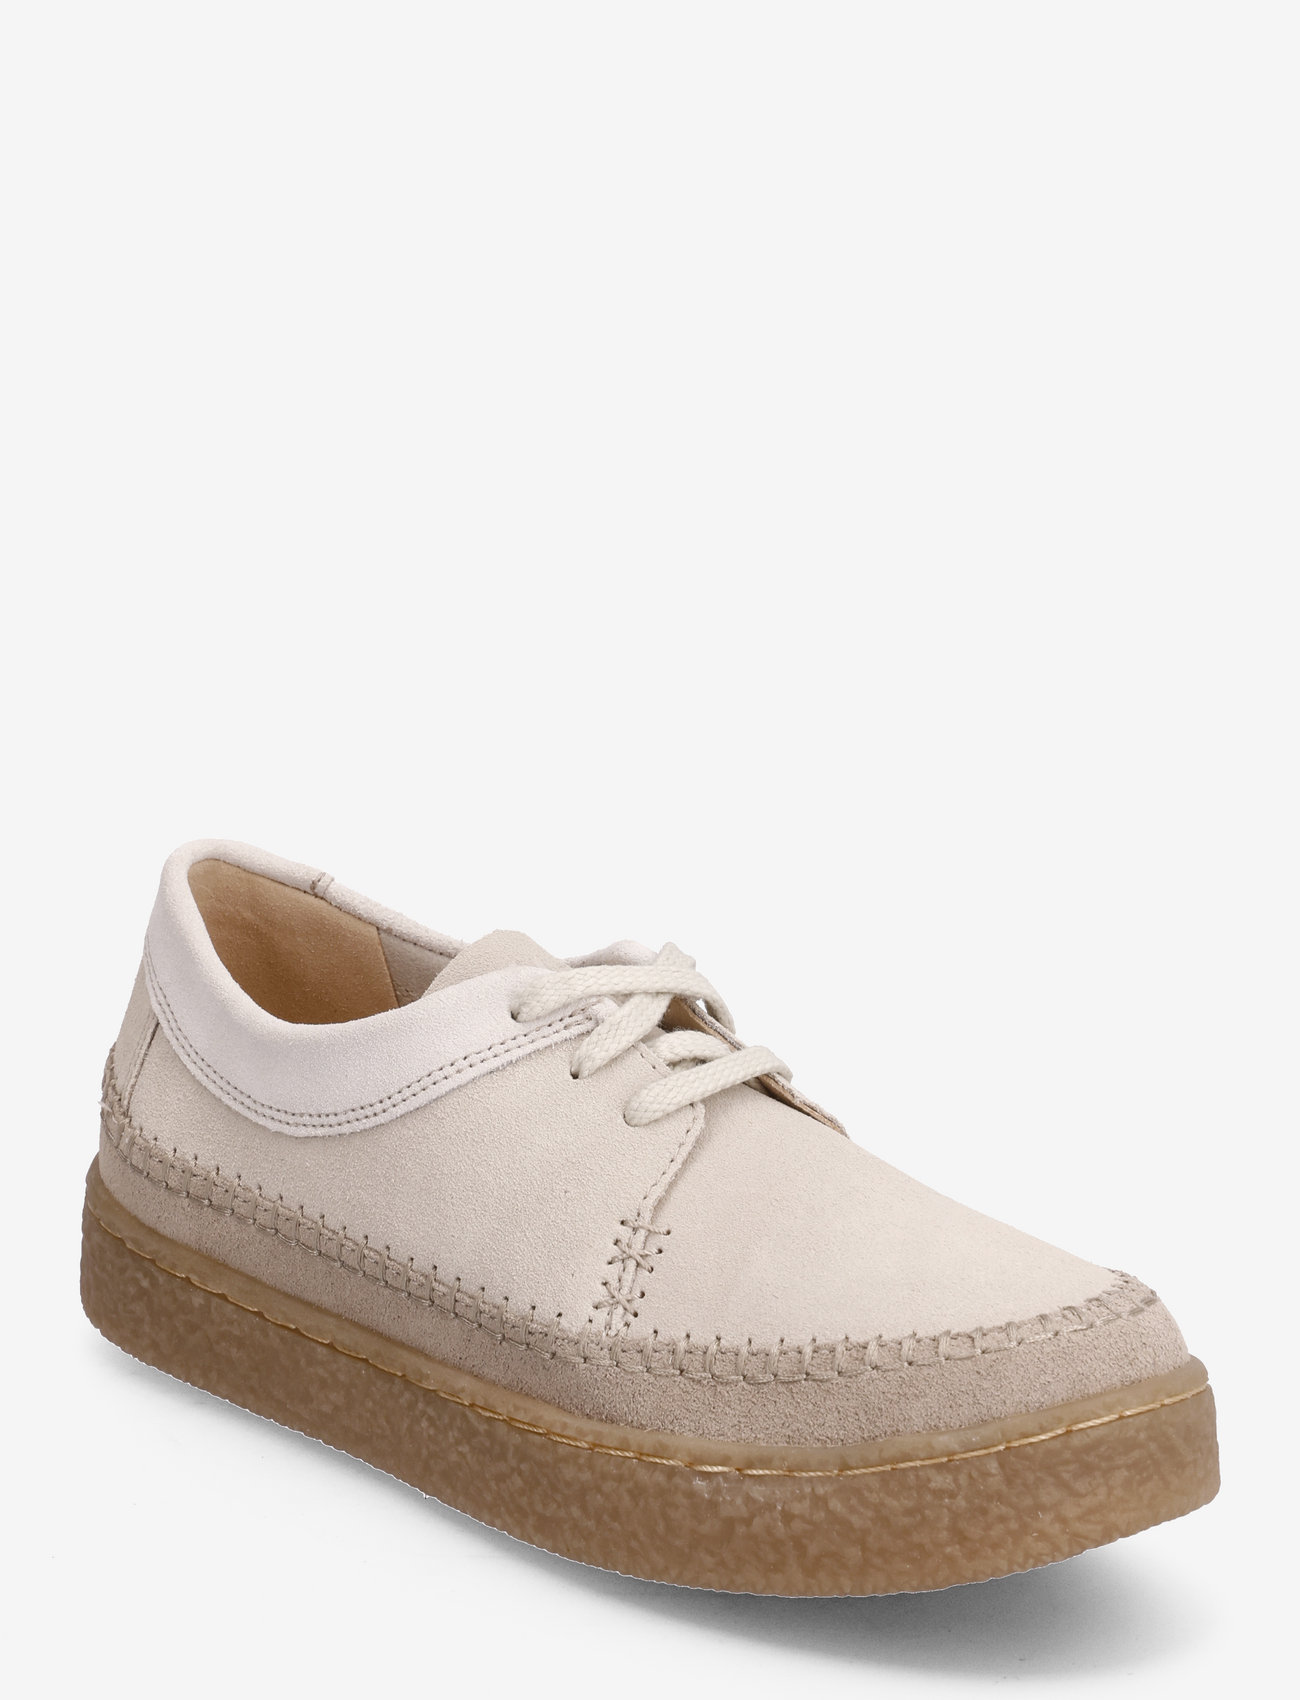 Clarks - Barleigh Weave - low top sneakers - white combi - 0